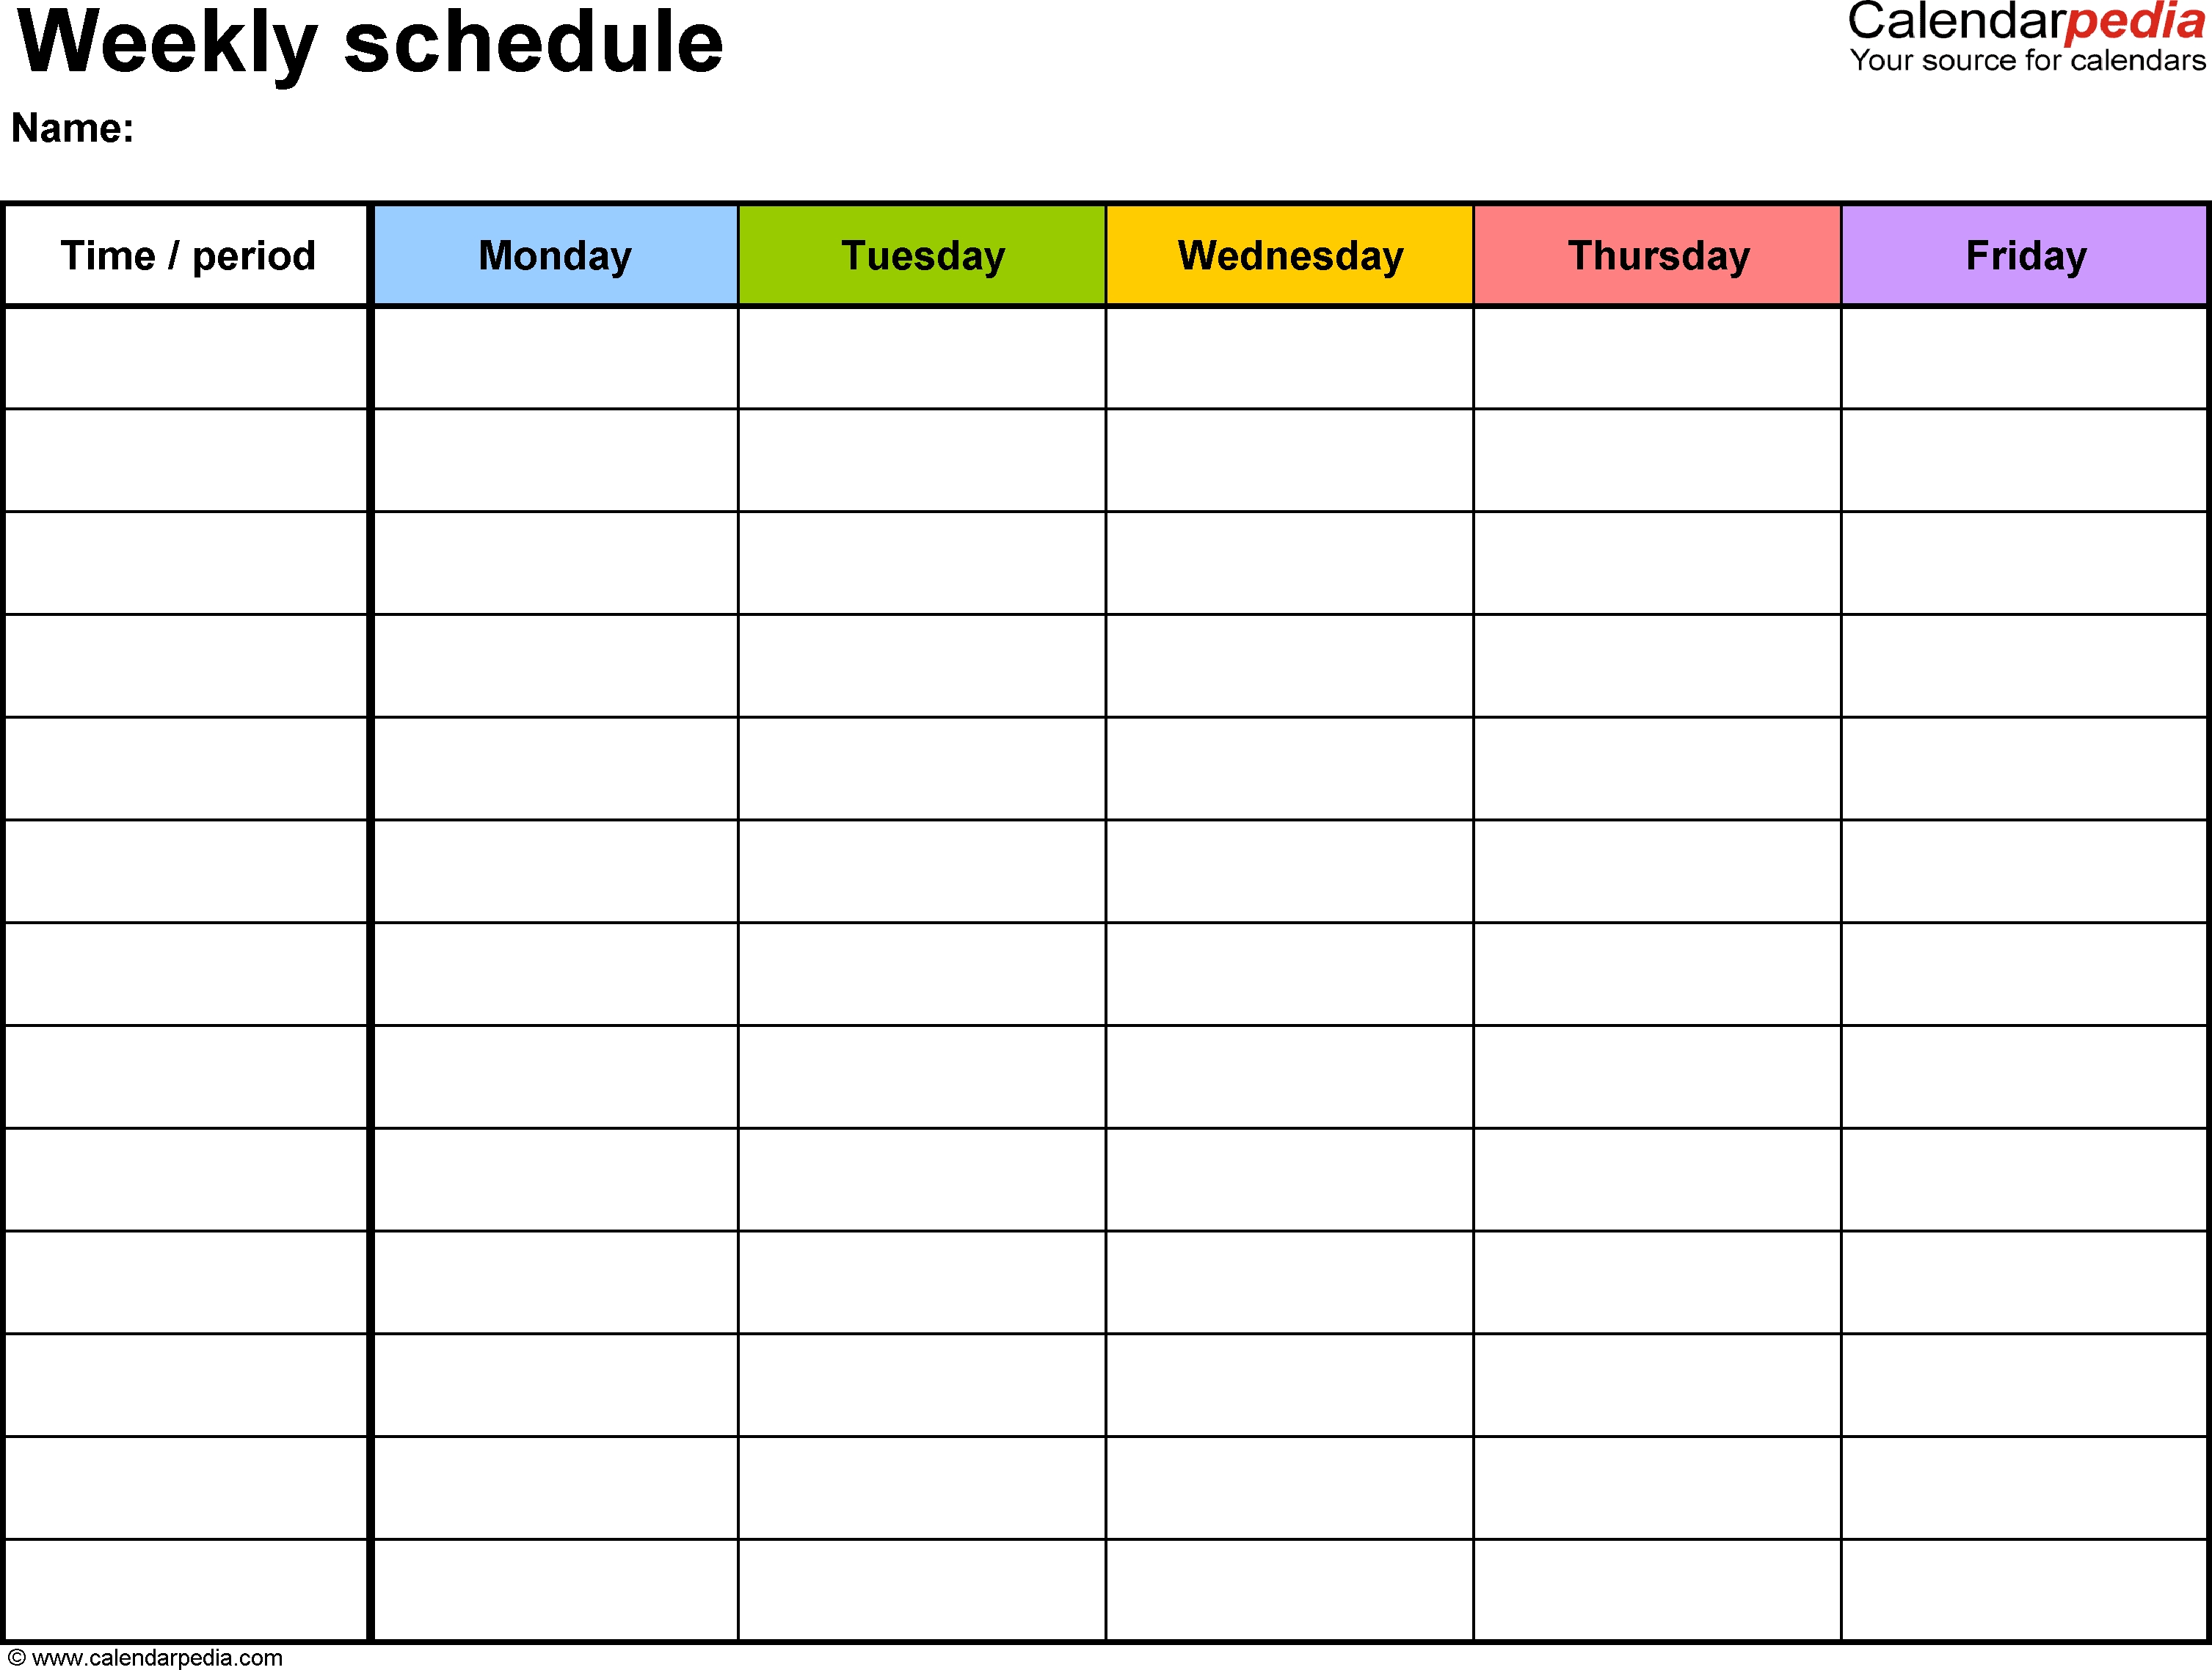 Free Weekly Schedule Templates For Word - 18 Templates 7 Week Calendar Template